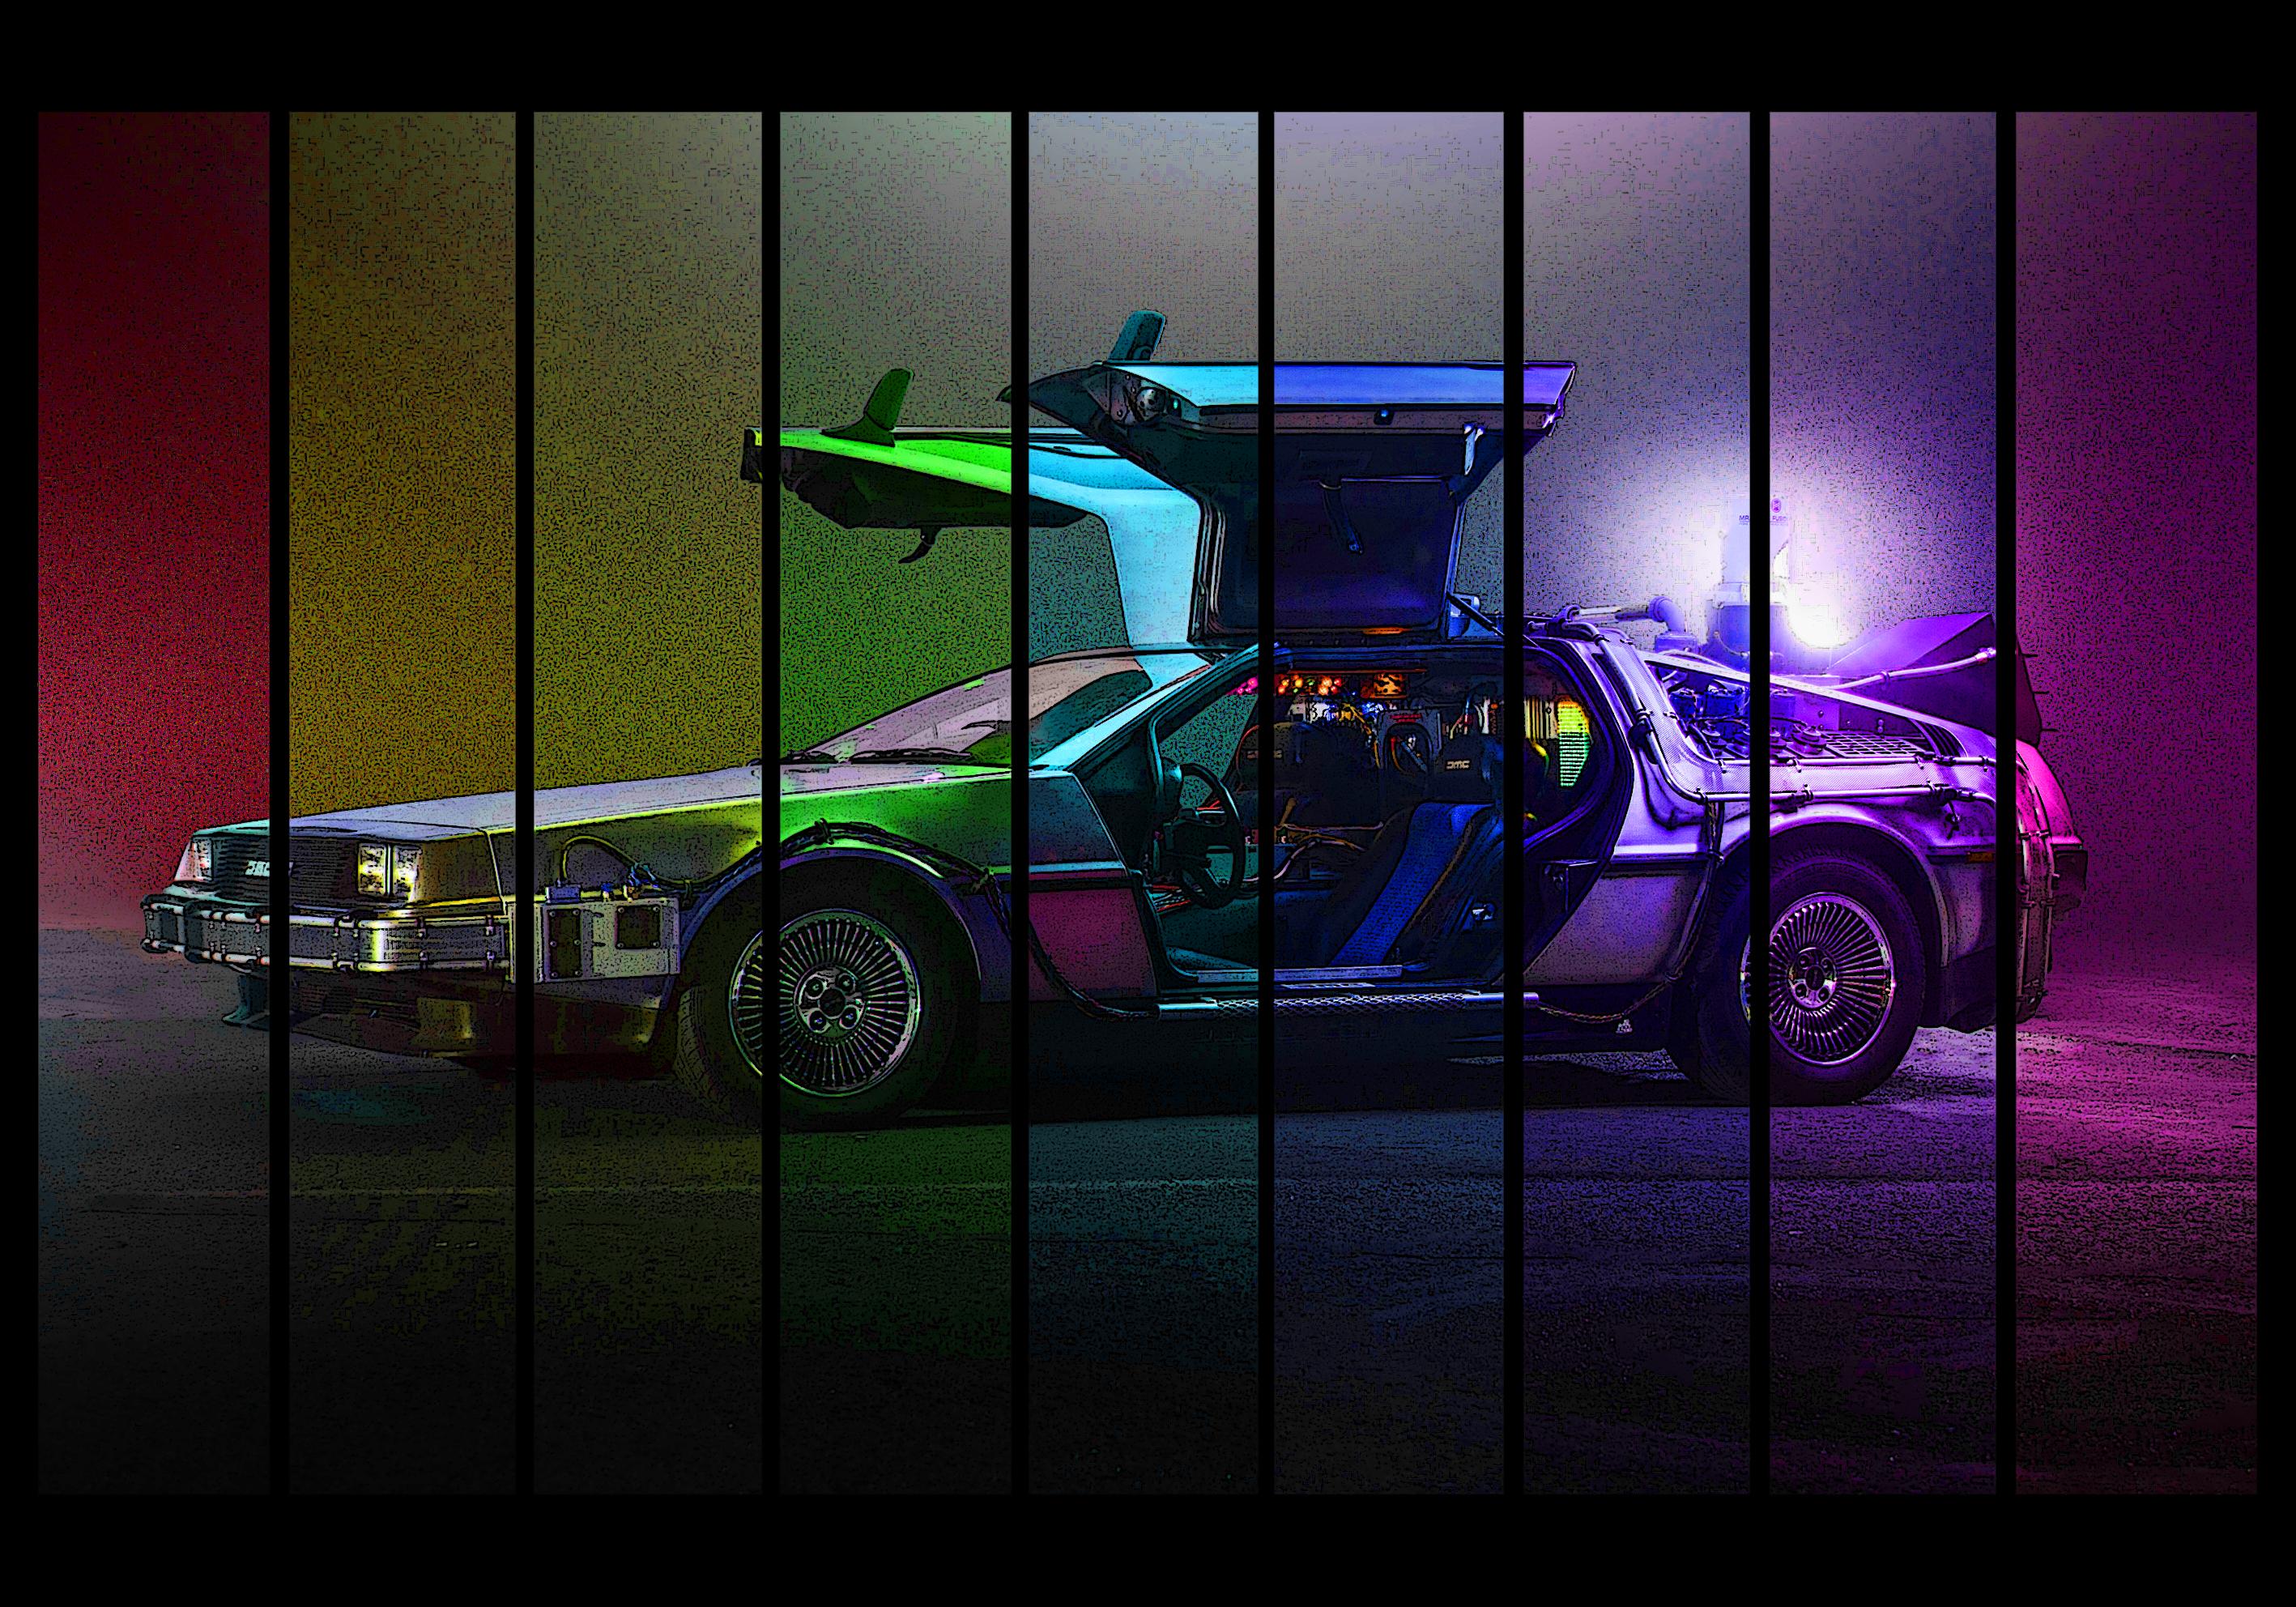 Delorean 4K wallpaper for your desktop or mobile screen free and easy to download